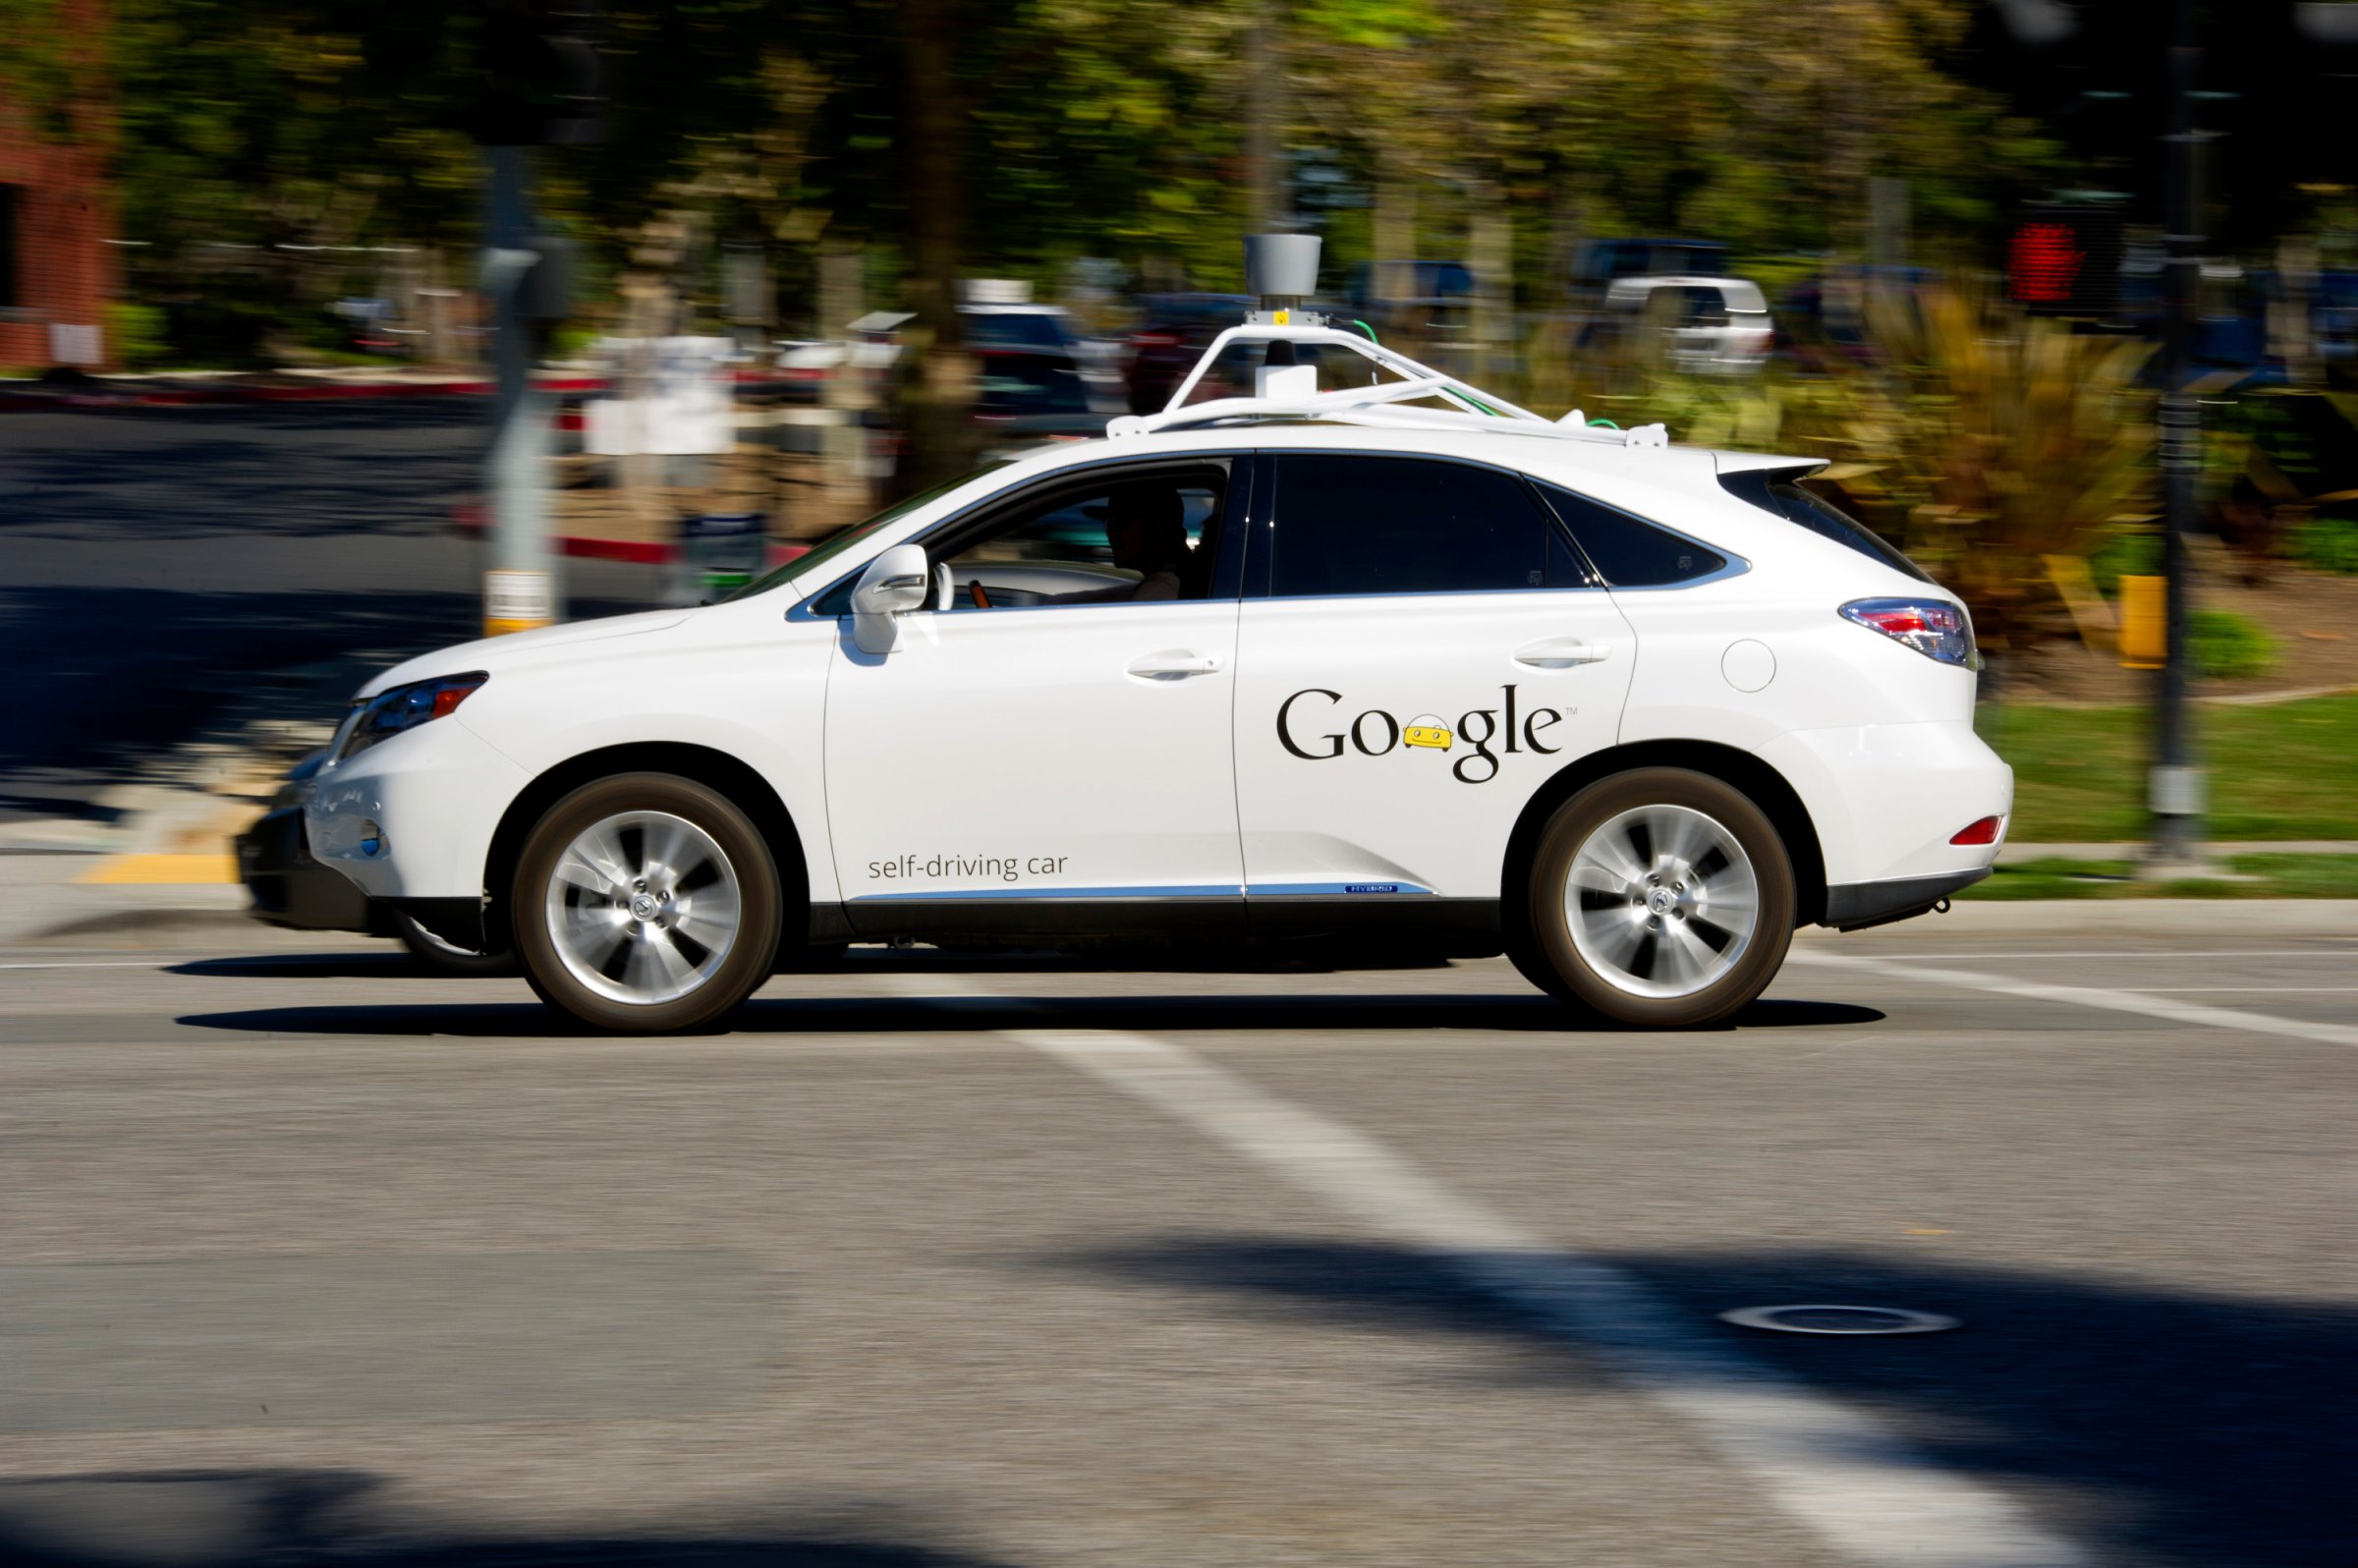 A driver drives a Google Inc. self-driving car in front of the company's headquarters in Mountain View, California on September 27, 2013.